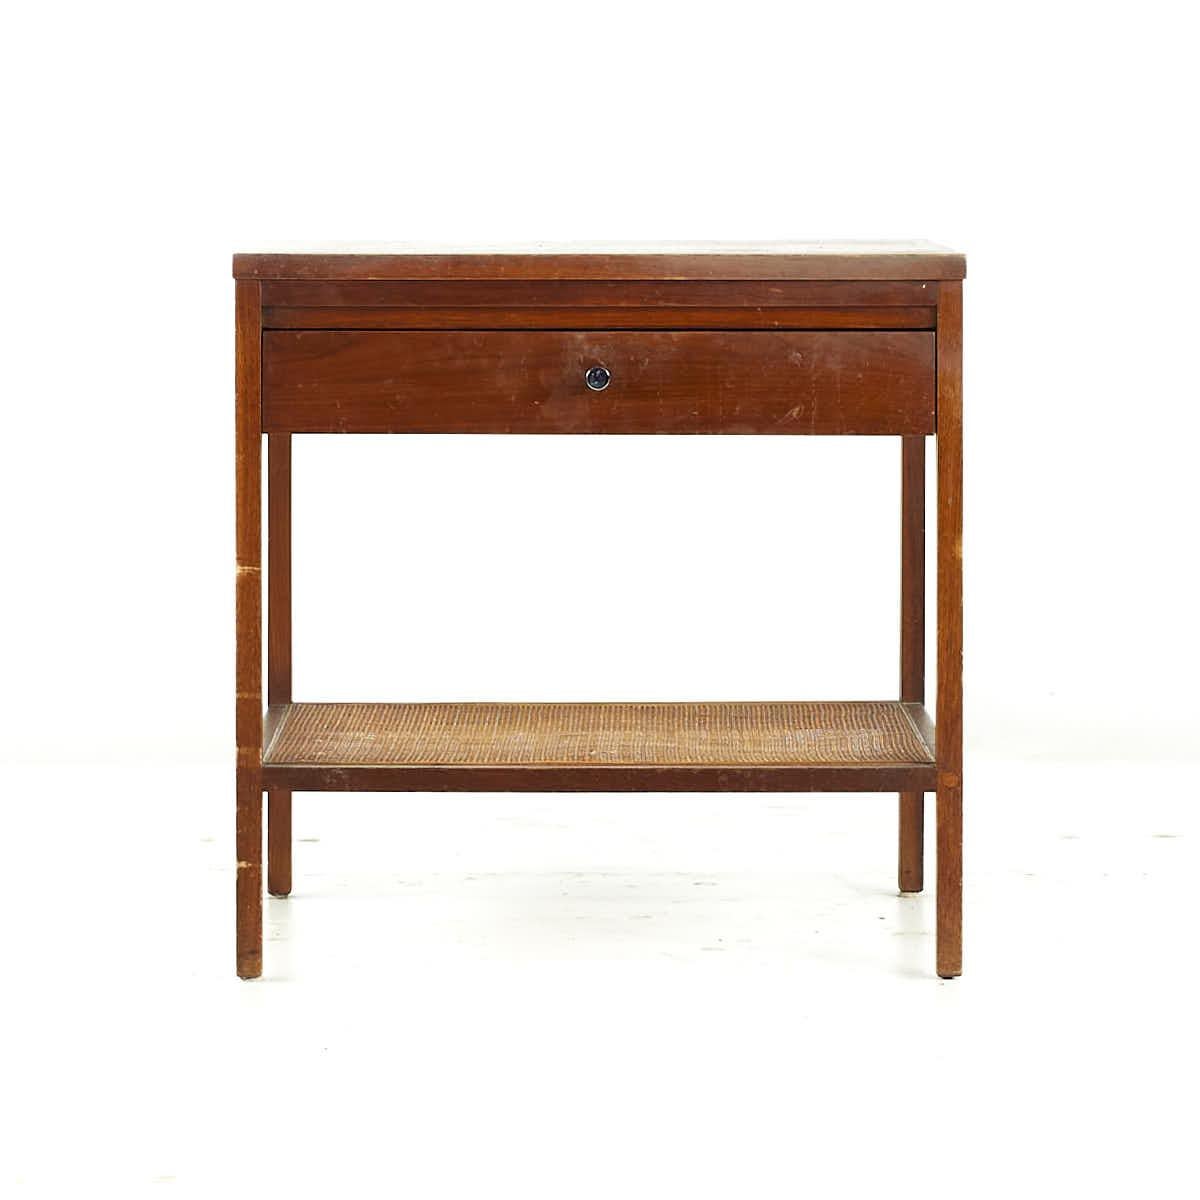 Lane Delineator midcentury Rosewood and Walnut Nightstand

This nightstand measures: 24 wide x 21 deep x 24 inches high

All pieces of furniture can be had in what we call restored vintage condition. That means the piece is restored upon